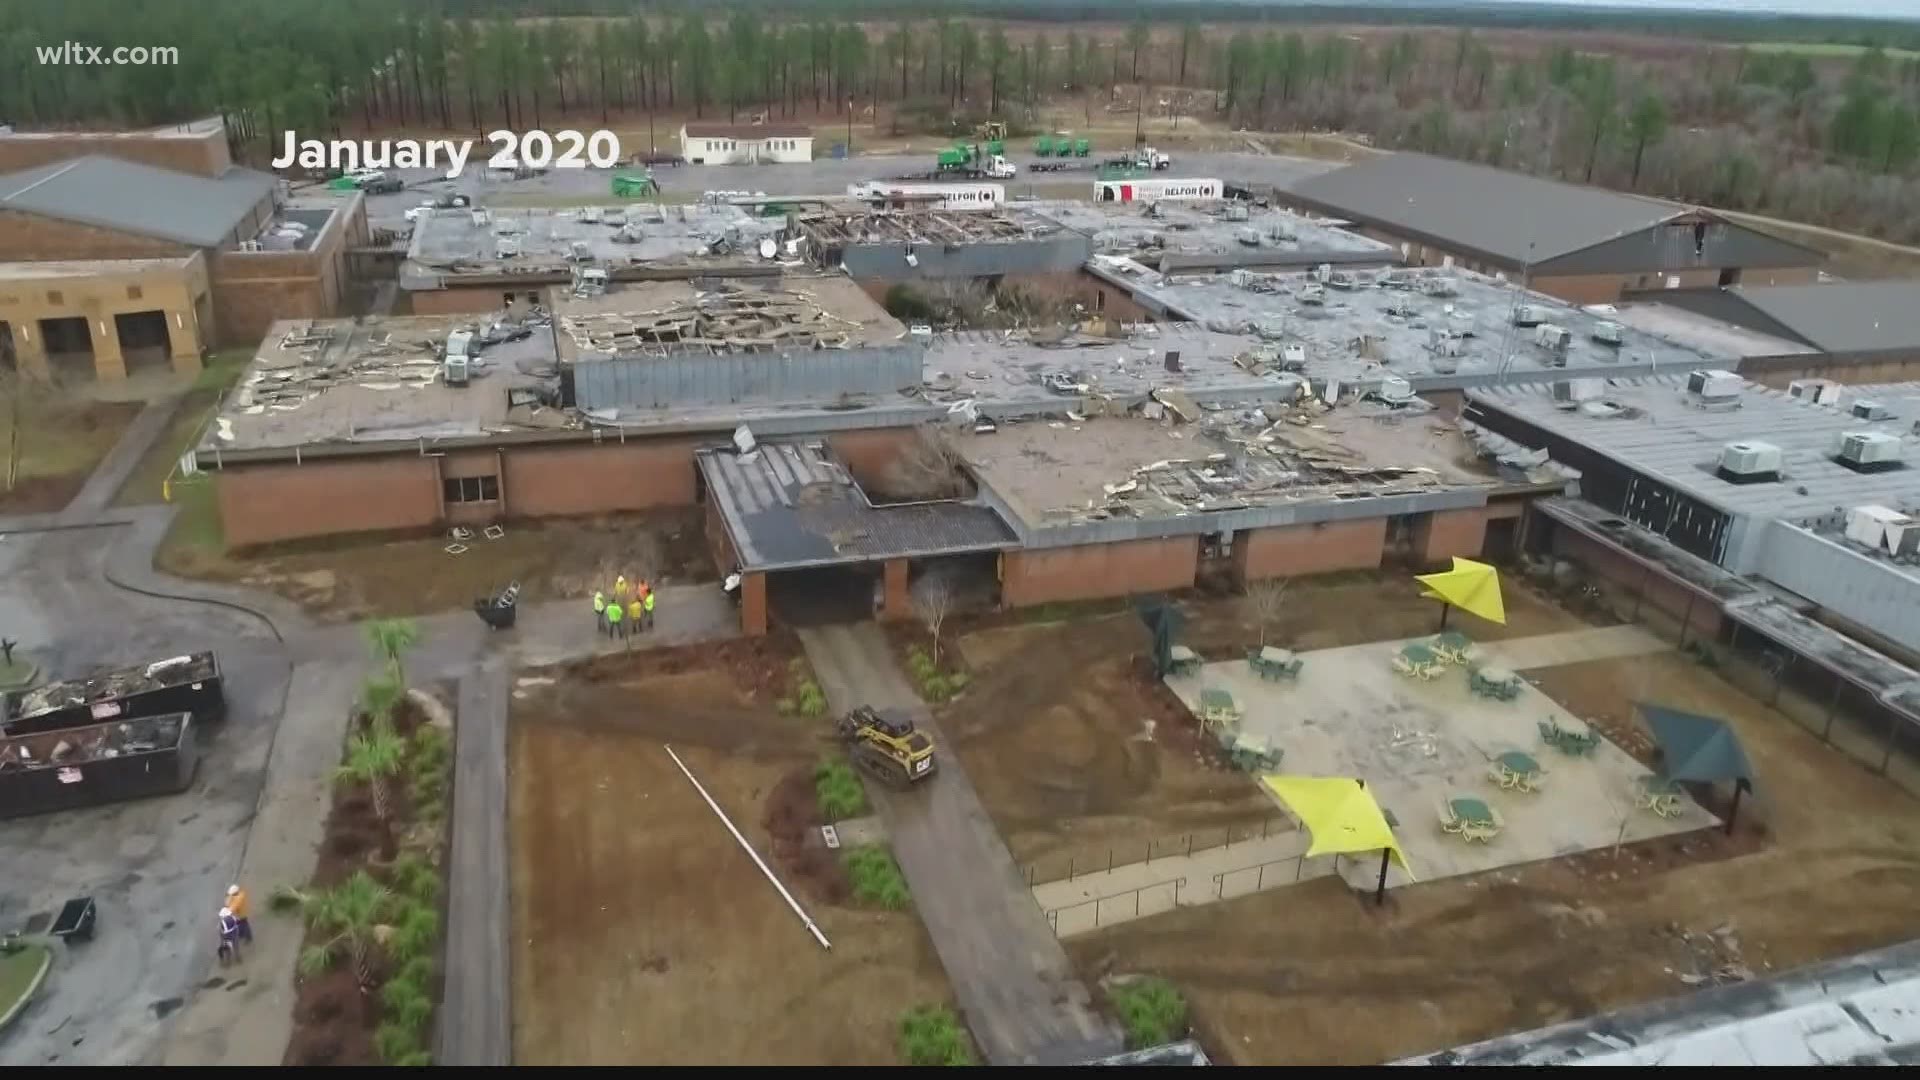 The school was destroyed by a tornado about 16 months ago.